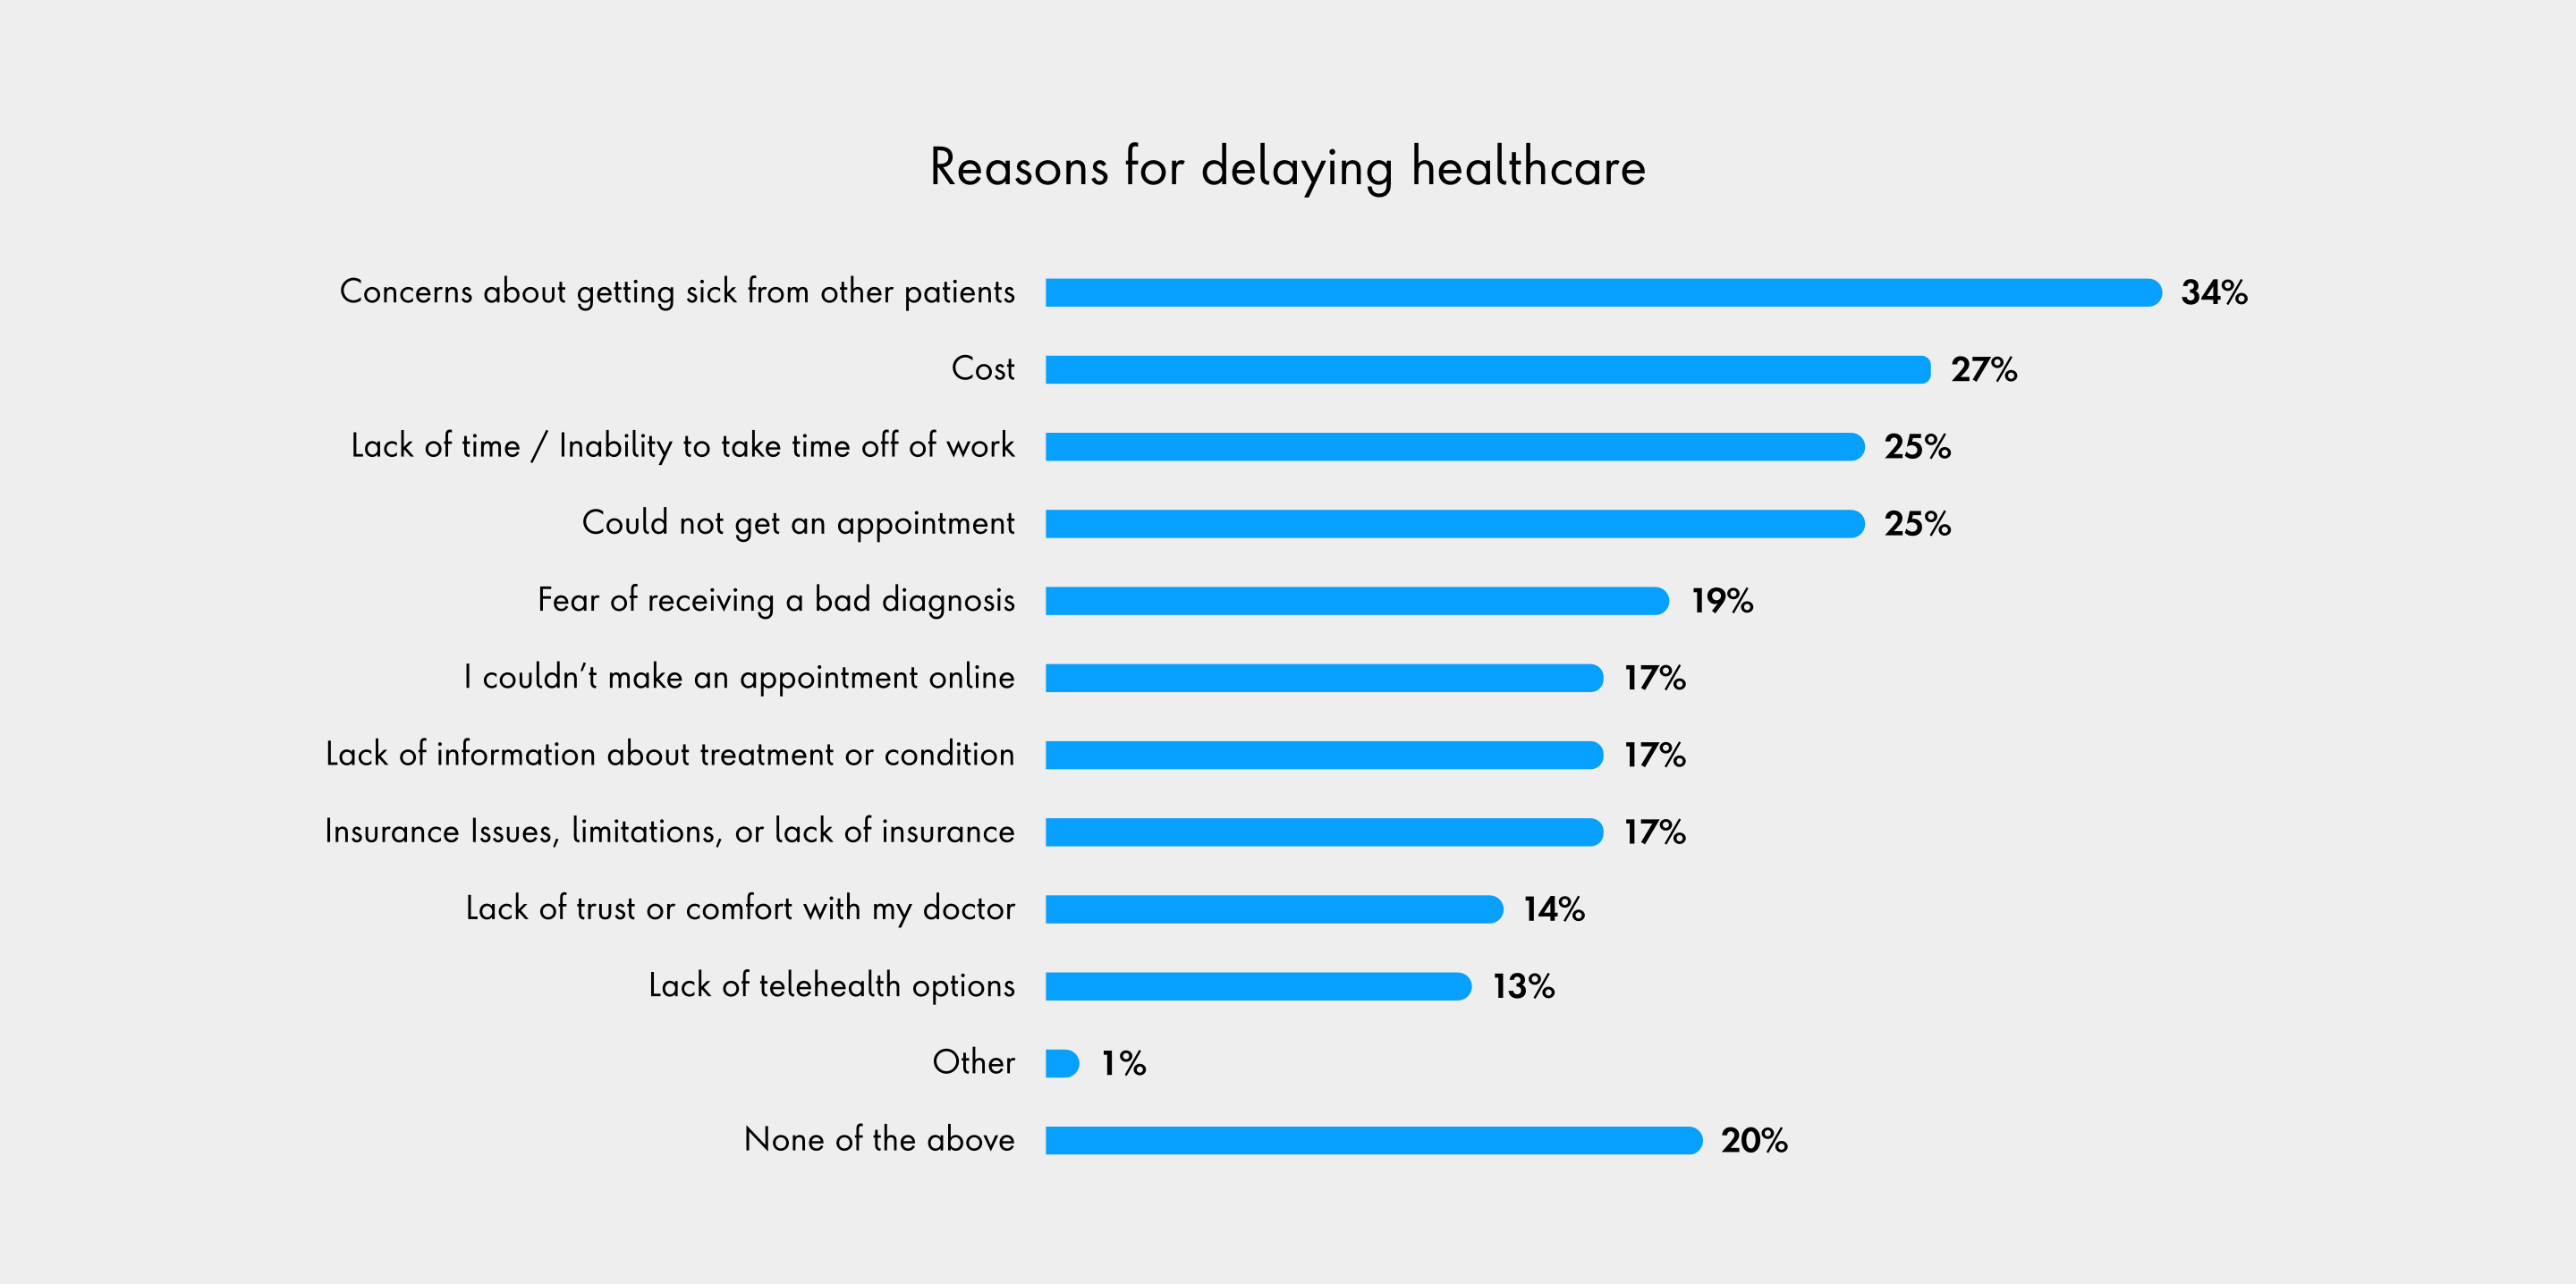 Reasons for Delaying Healthcare chart shows the top reason is concern about getting sick from other patients and not for lack of telemedicine options.